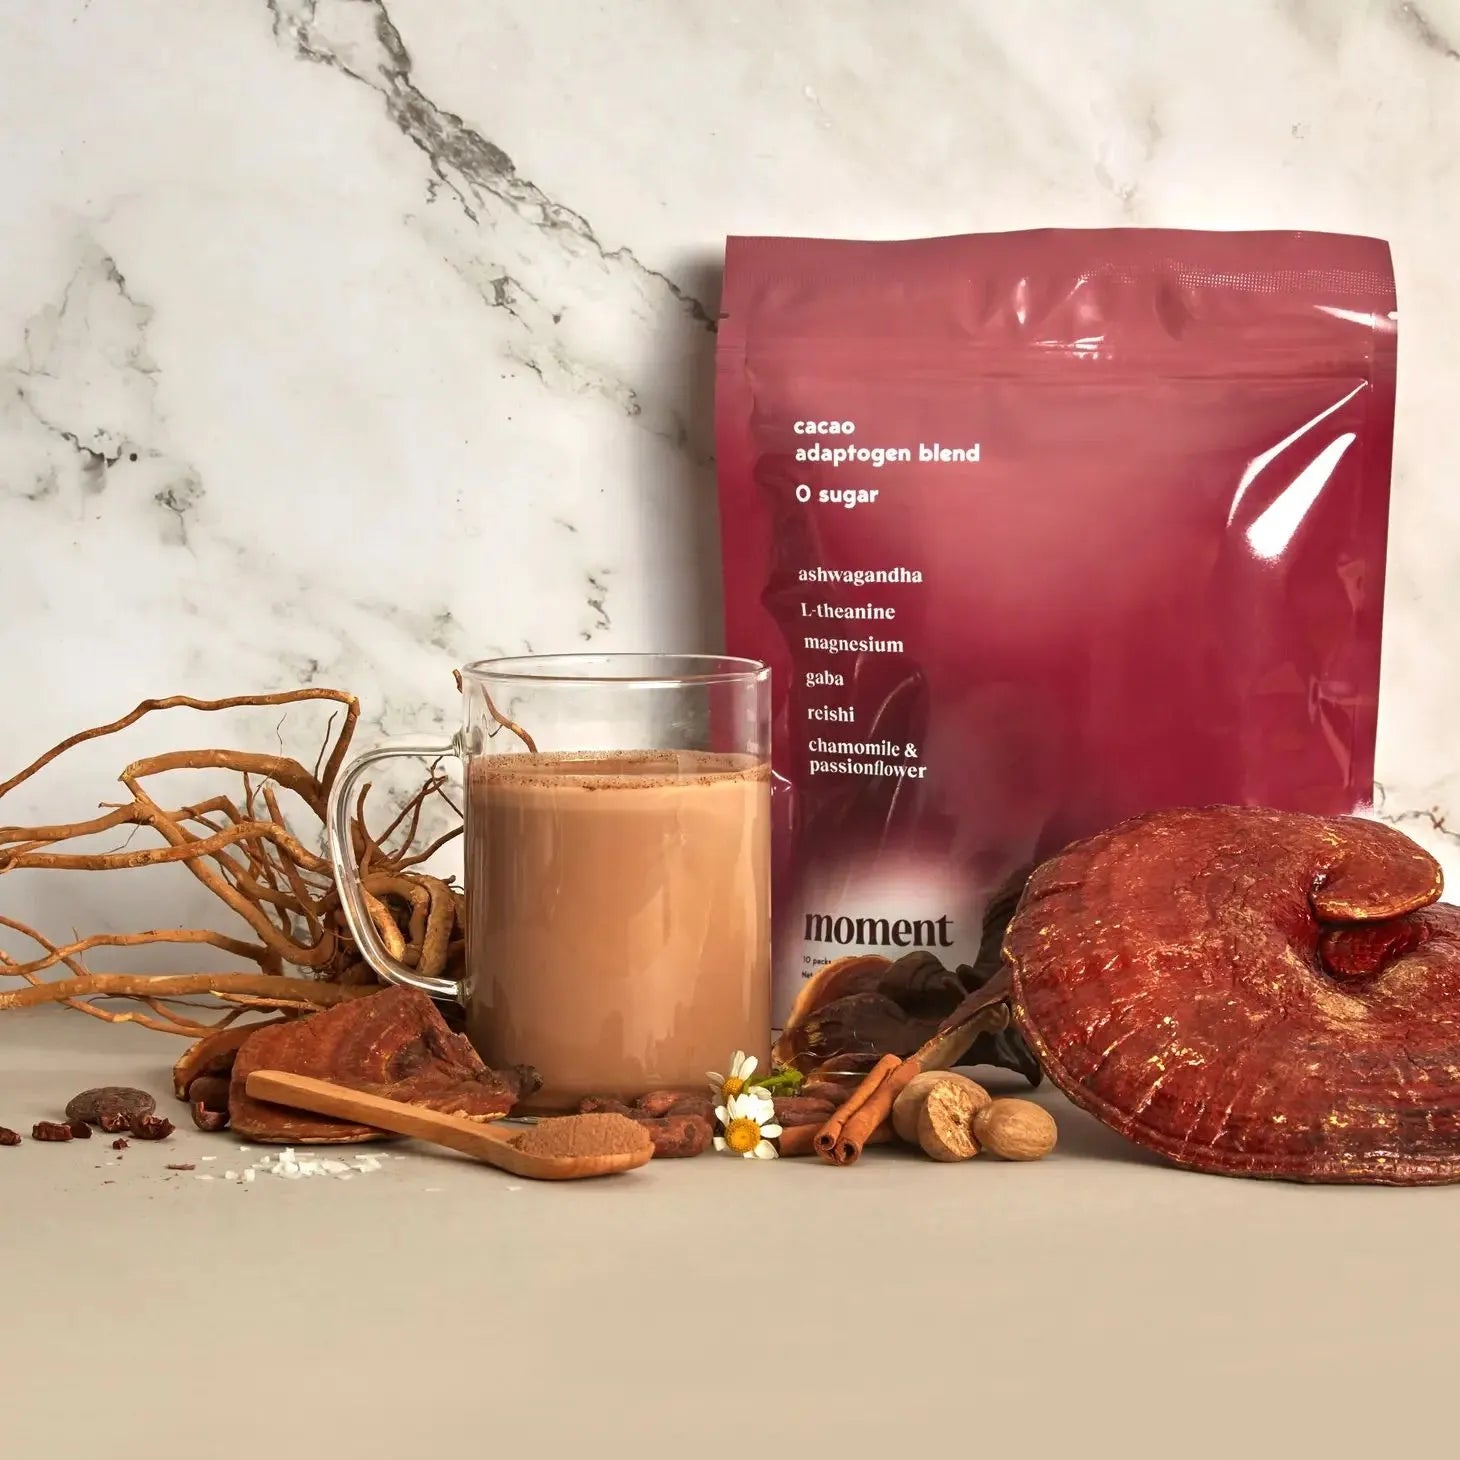 a pacage of moment's cacao adaptogen blend along with a full glass and a variety of herbs